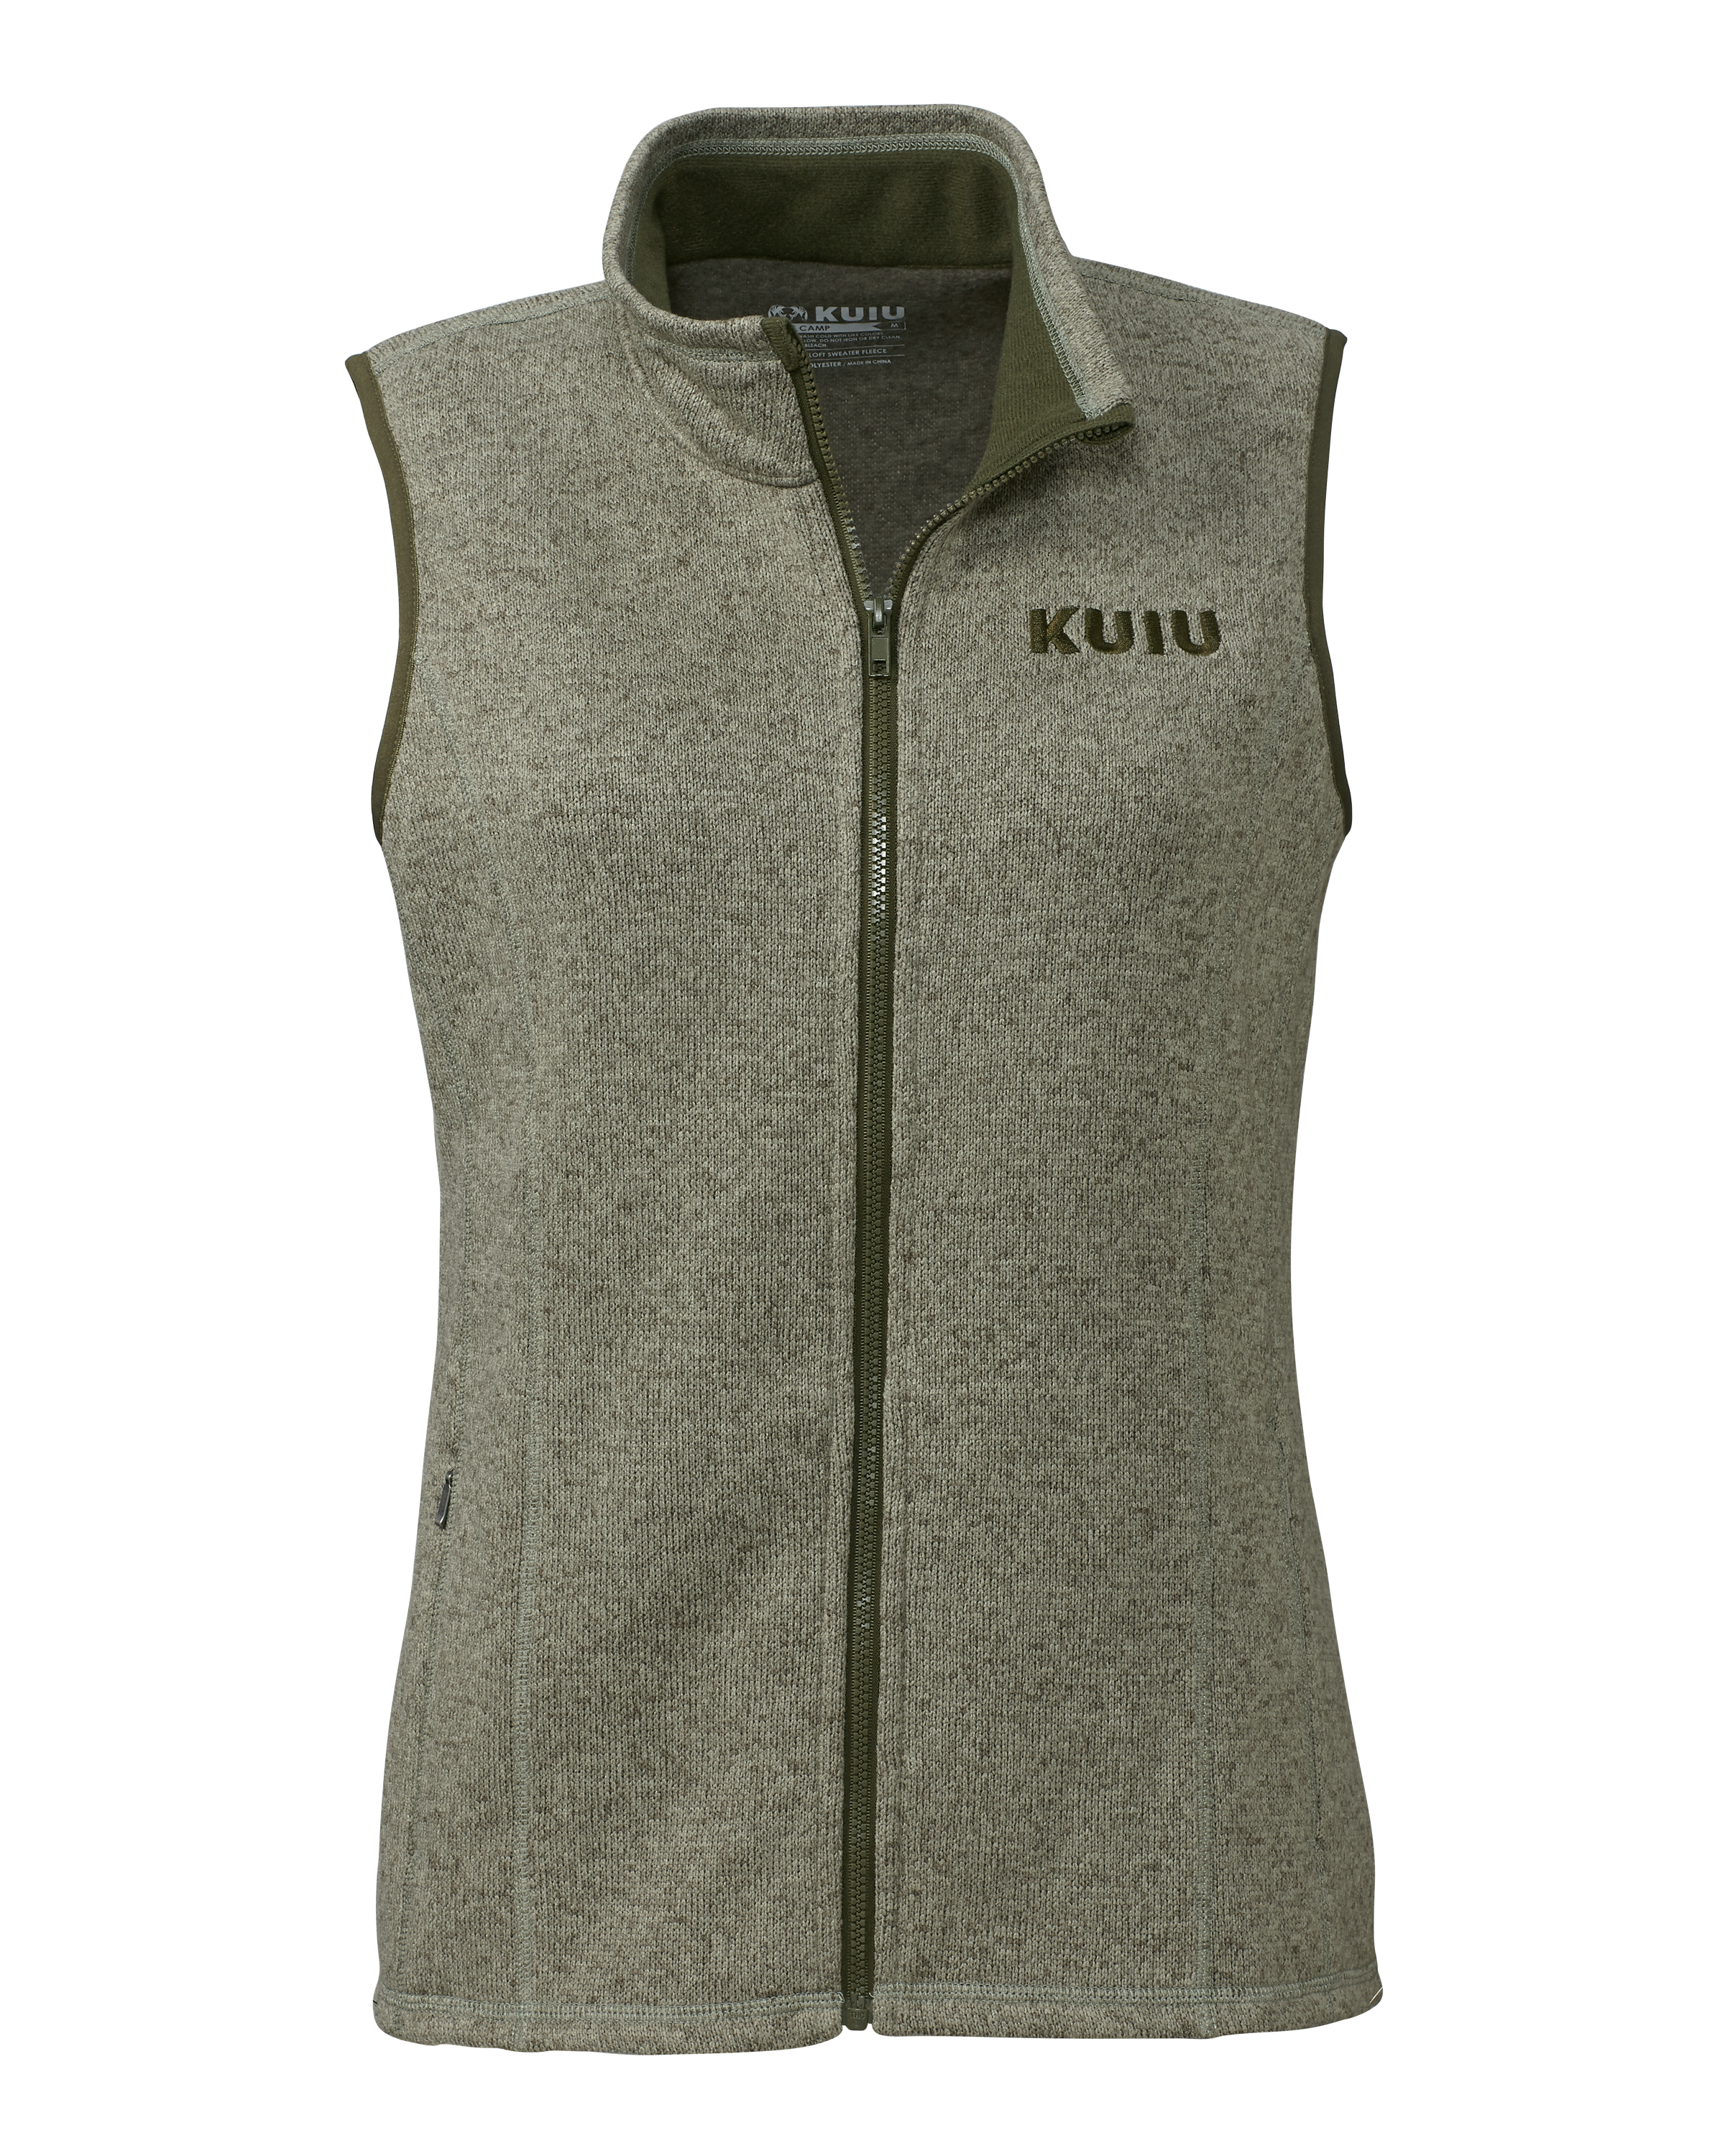 KUIU Outlet Women's Base Camp Sweater Vest in Heather Olive | Small